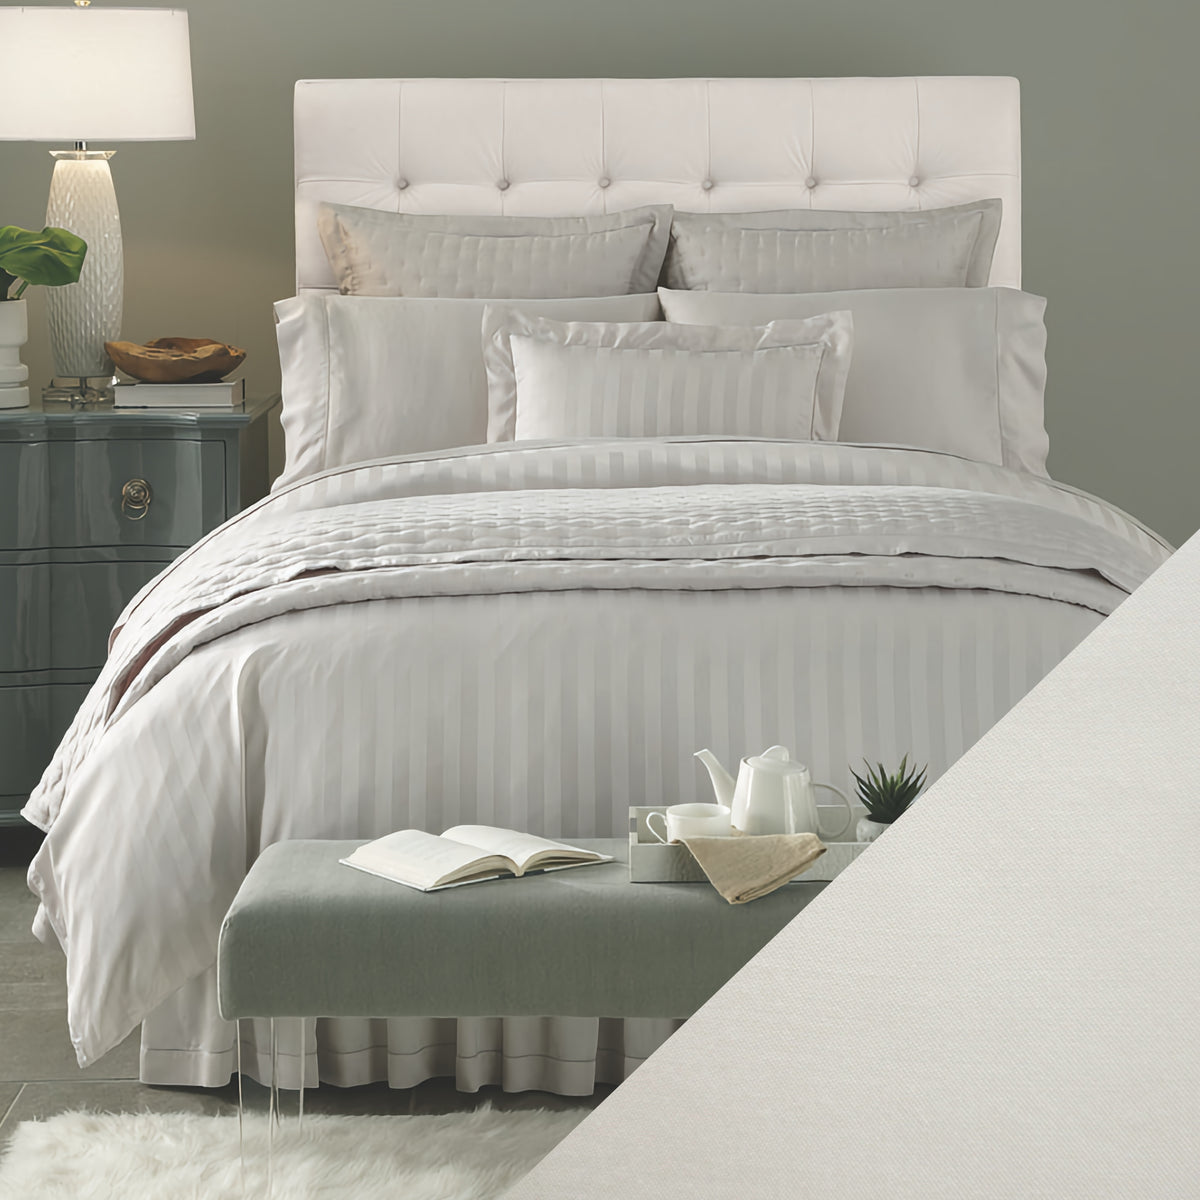 Home Treasures Athens Bedding Lifestyle Solid Ivory Fine Linens